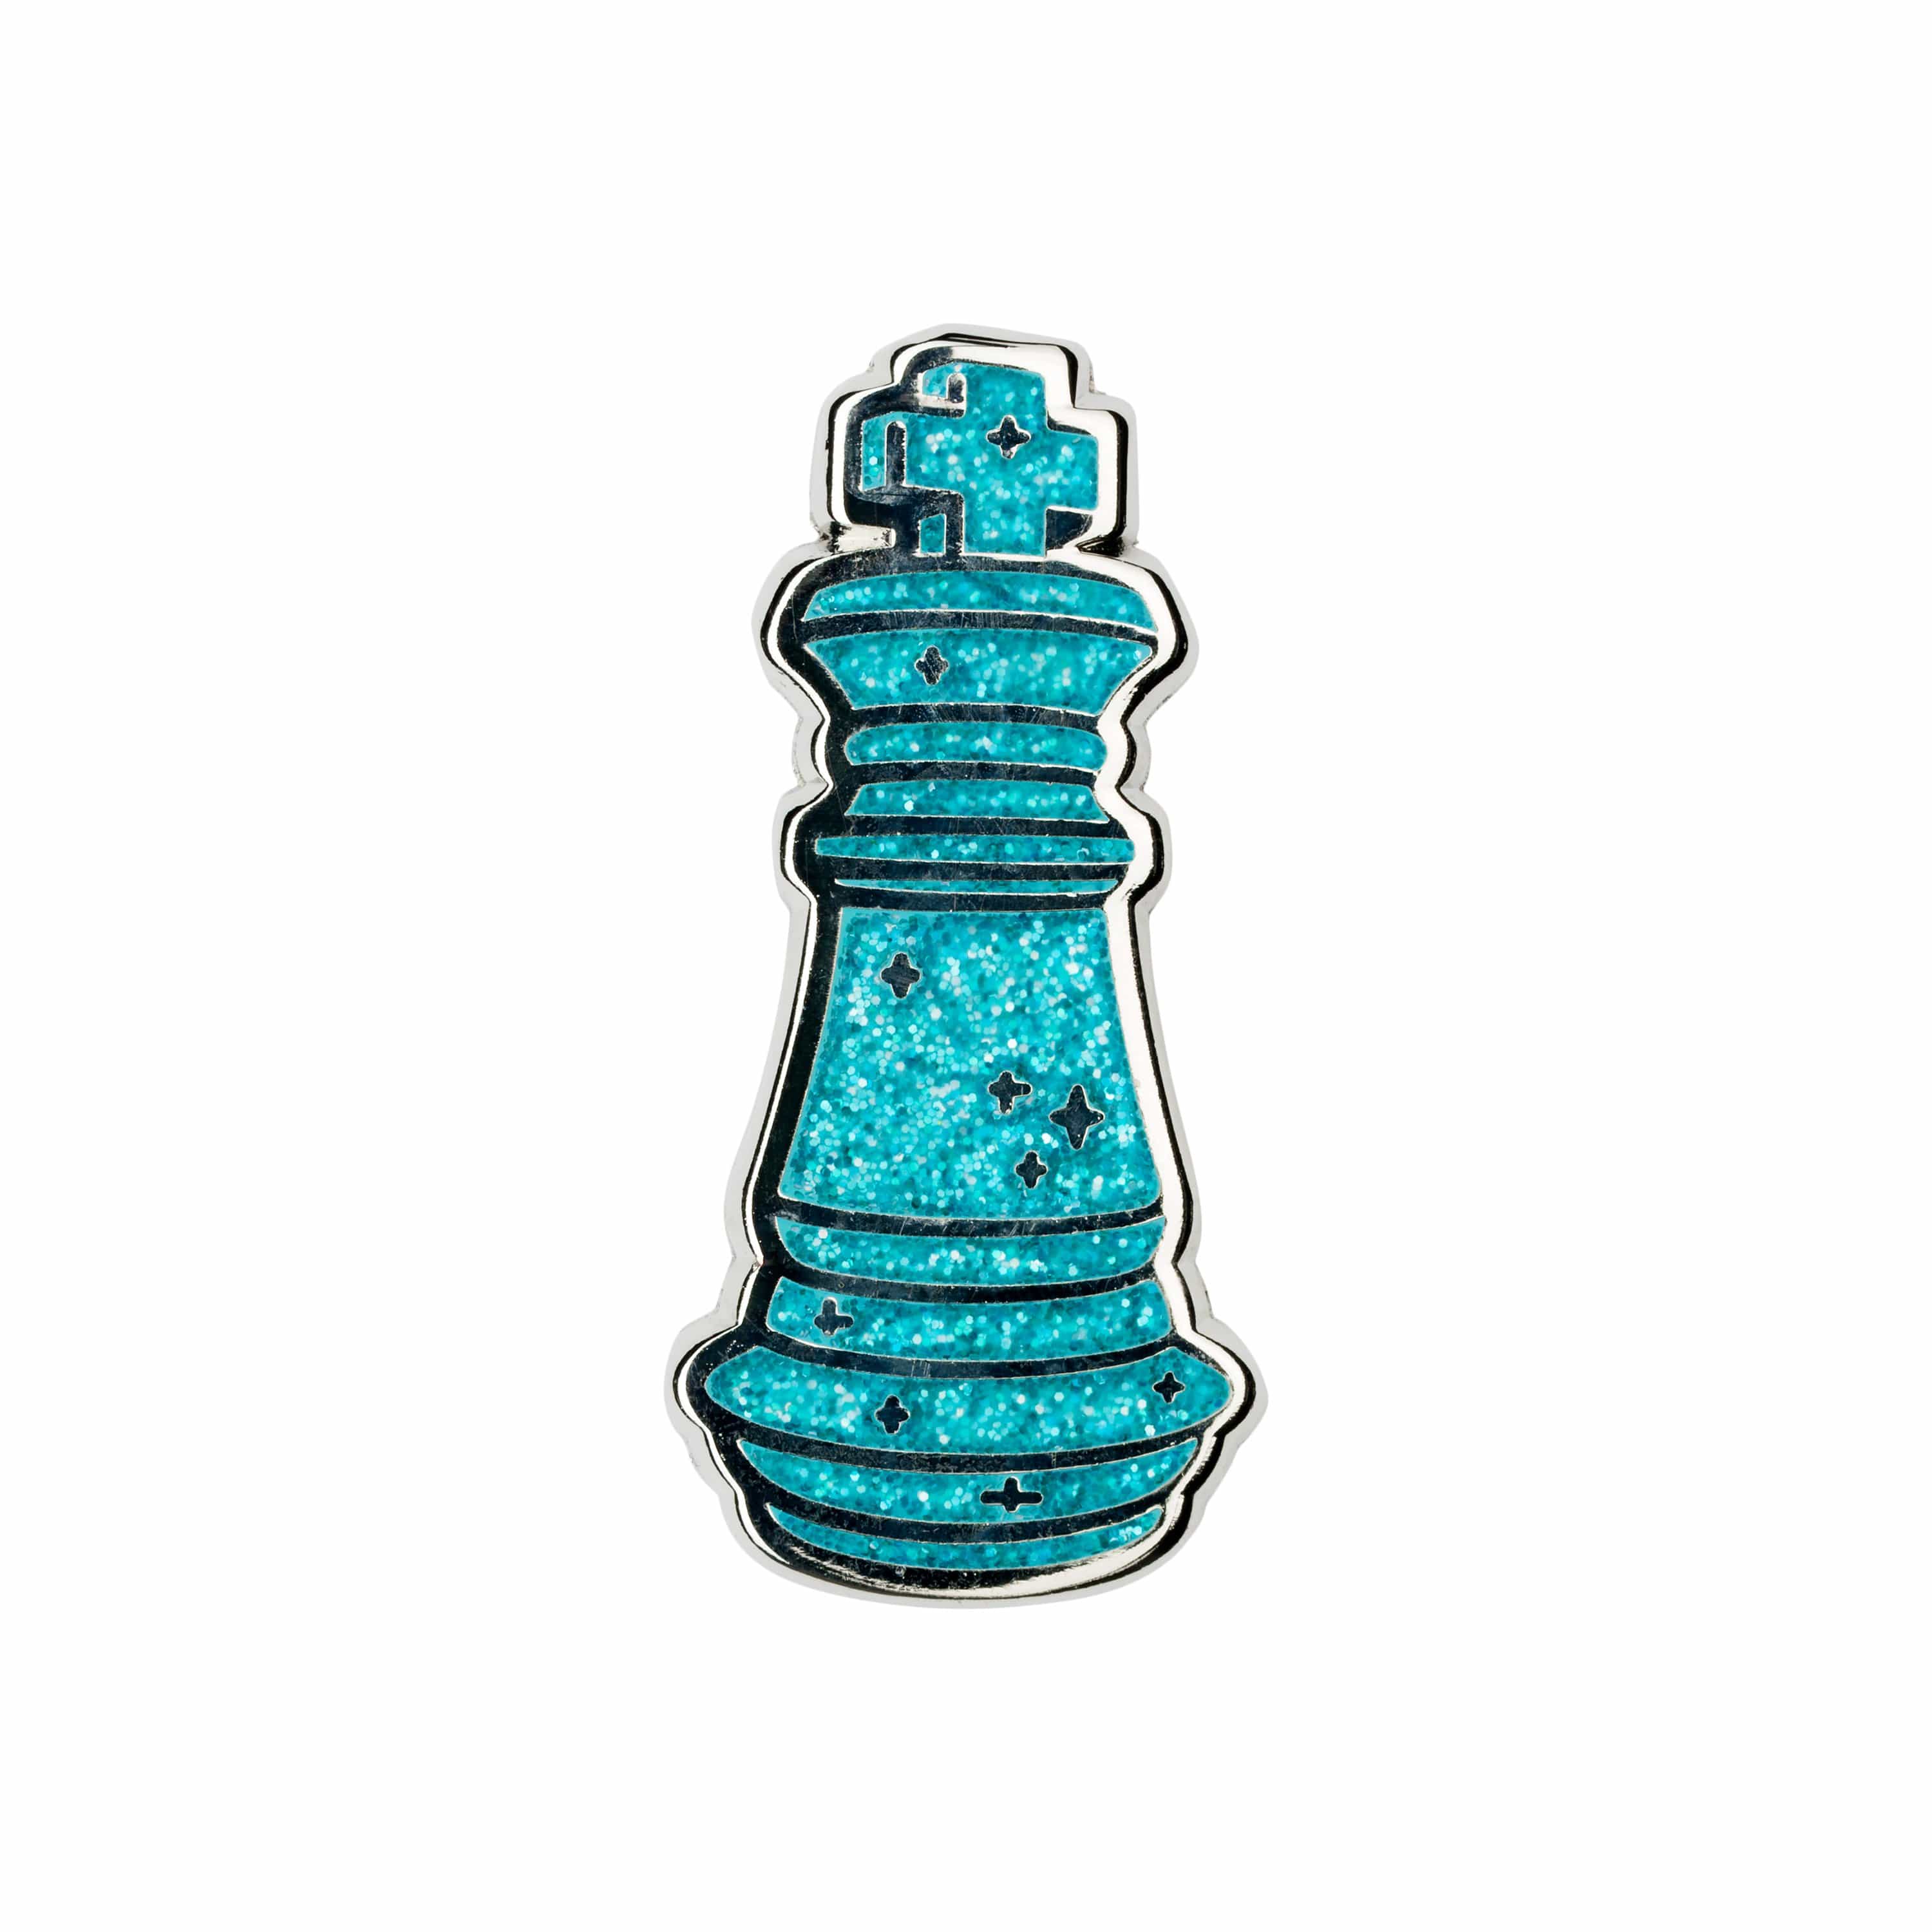 No Game No Life - Chess Piece Silver Plated Enamel Lapel Pin